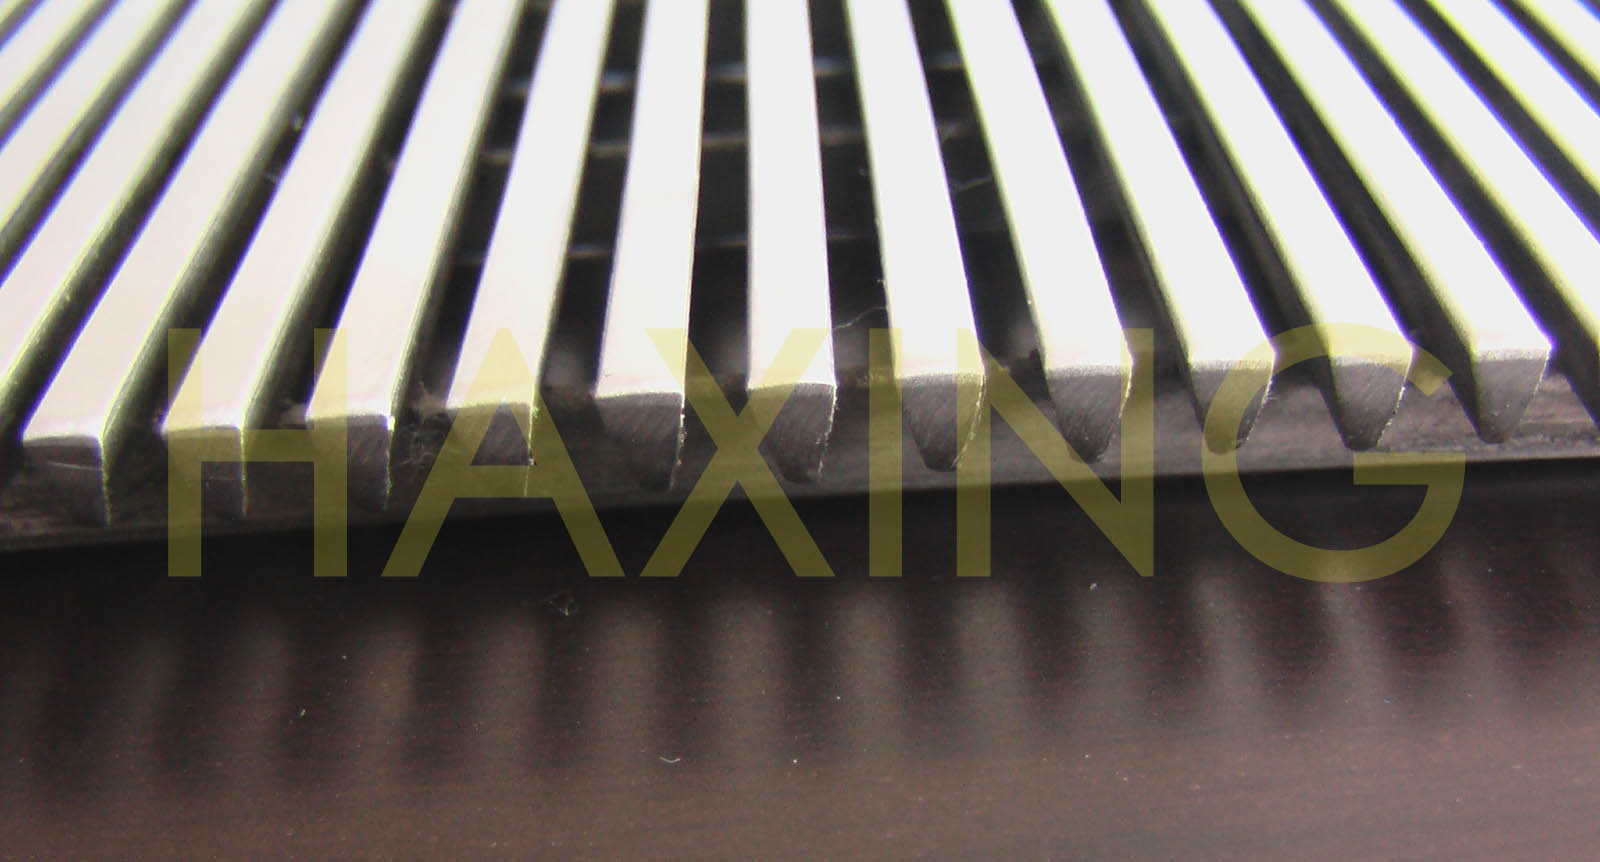 Sieve bend screen or drain grille